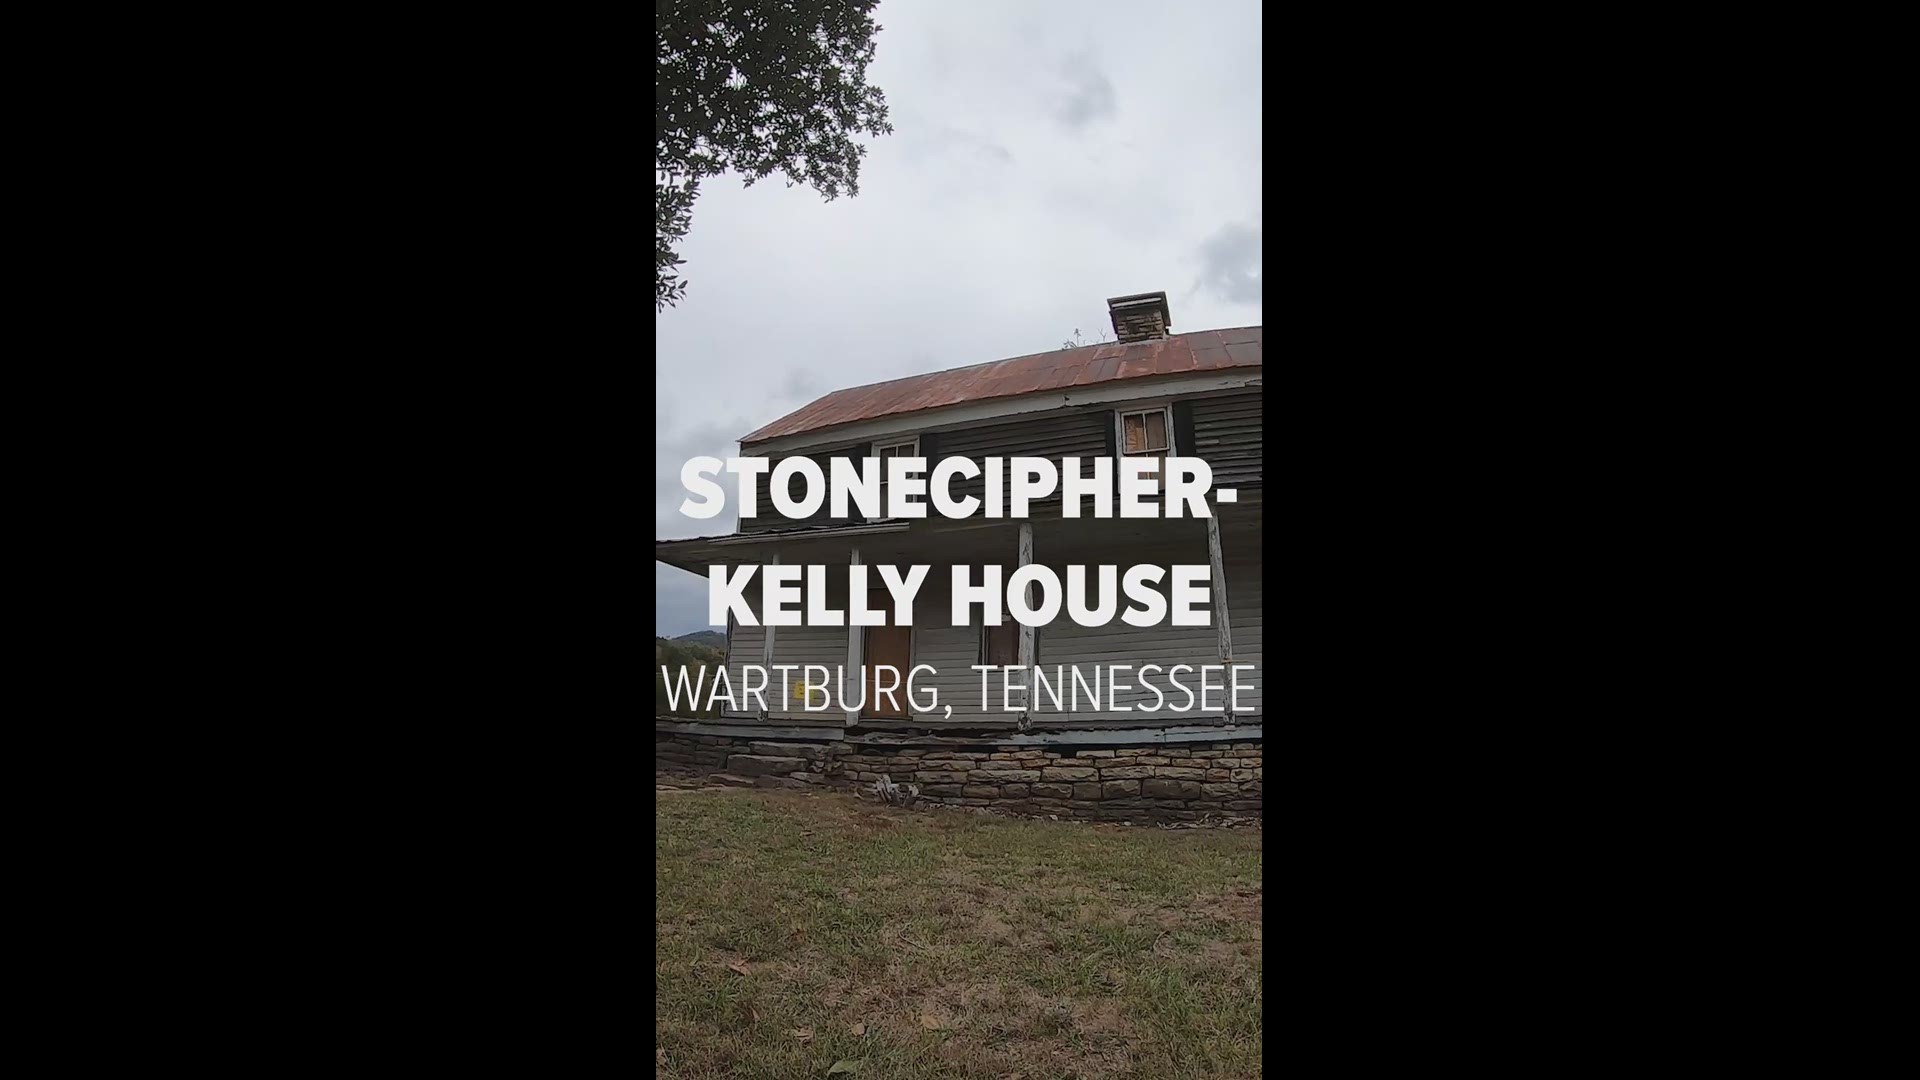 The Stonecipher-Kelly House is the oldest standing settlement house in Morgan County.